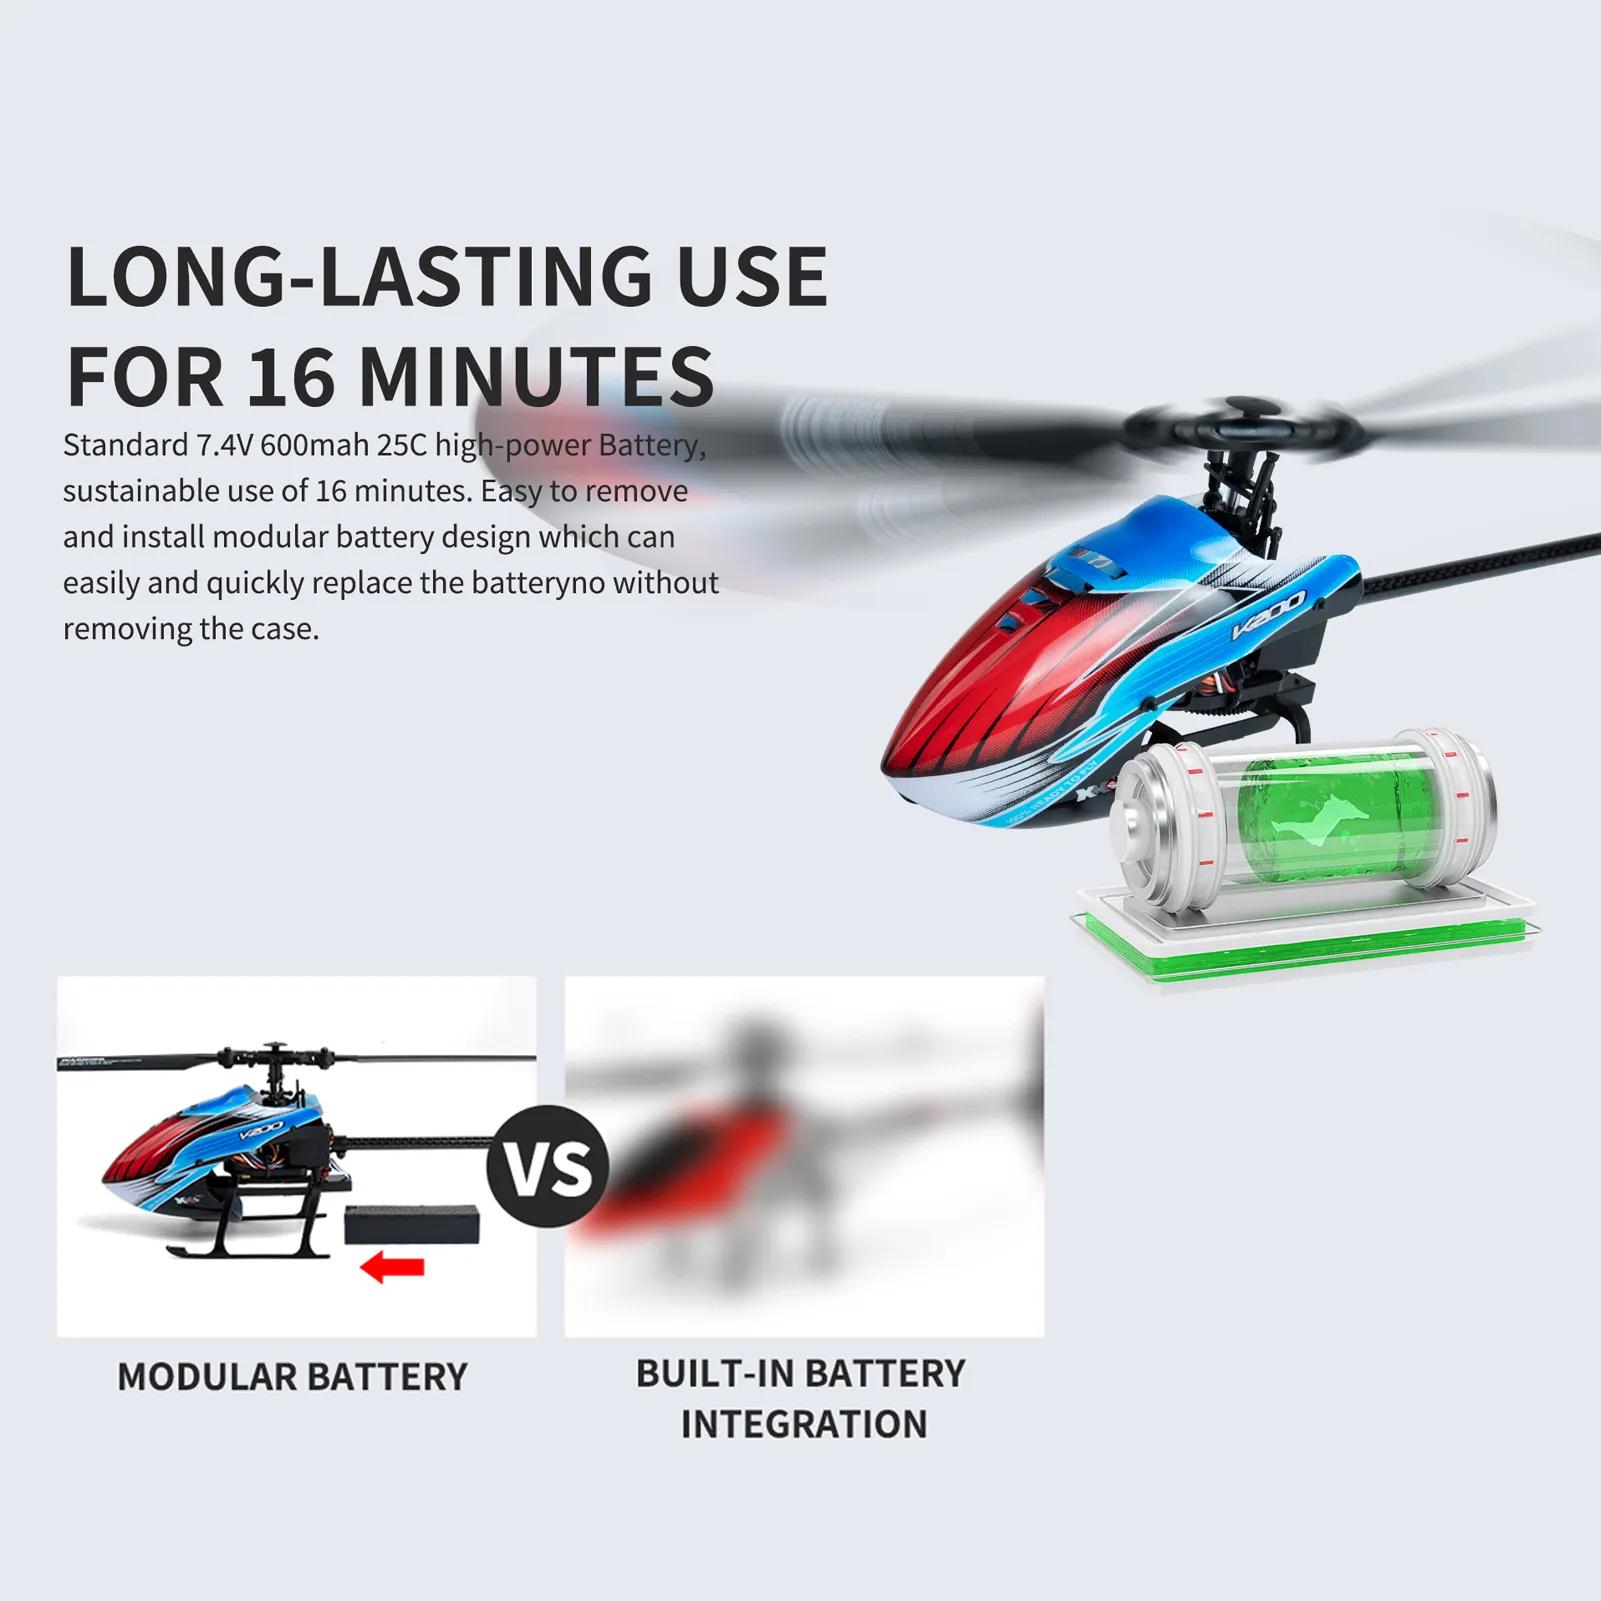 Blade Remote Control Helicopter:  Key Features and Functionality of the Blade Remote Control Helicopter